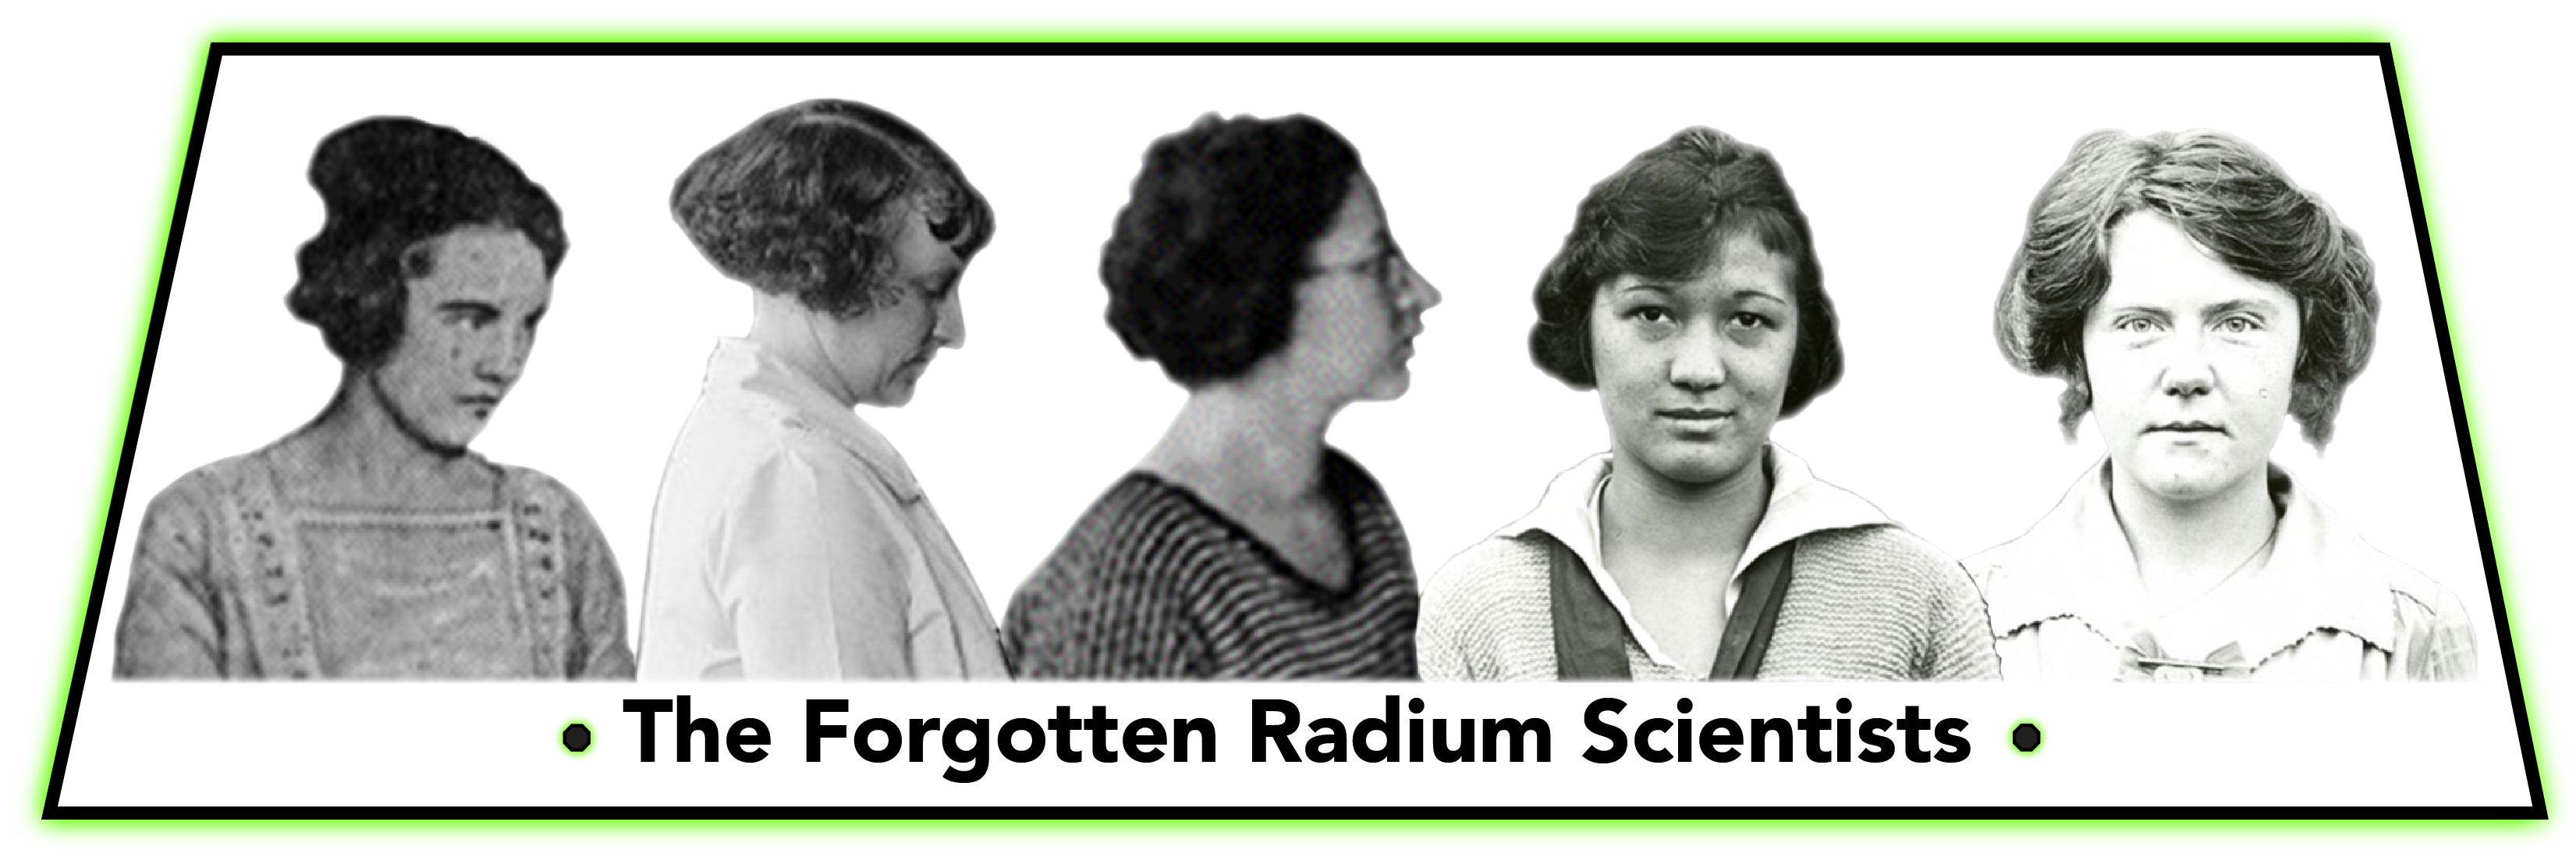 The Forgotten Radium Scientists Title Teaser with Damon, Torrey, Bower, Yung-Kwai, and Alderton portraits